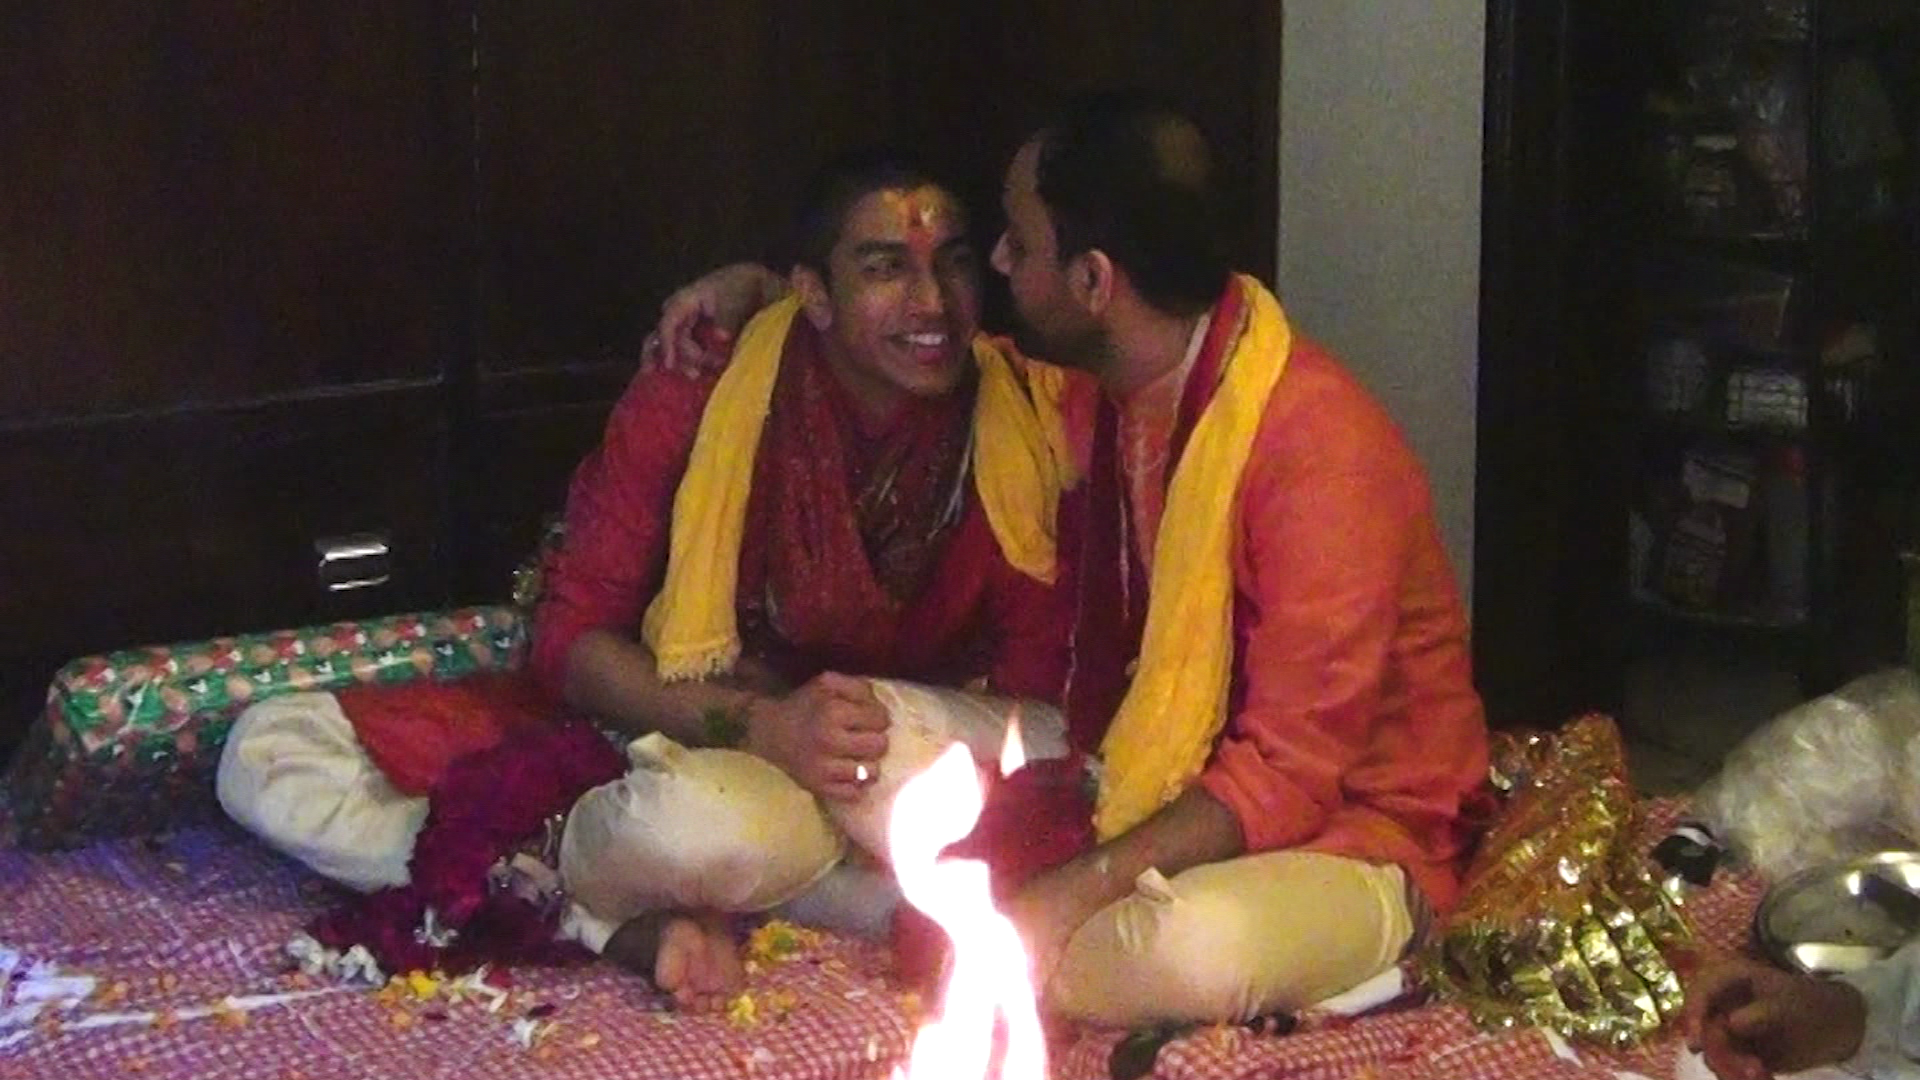 This Indian gay couple got secretly married. Now they are fighting for  recognition | CNN